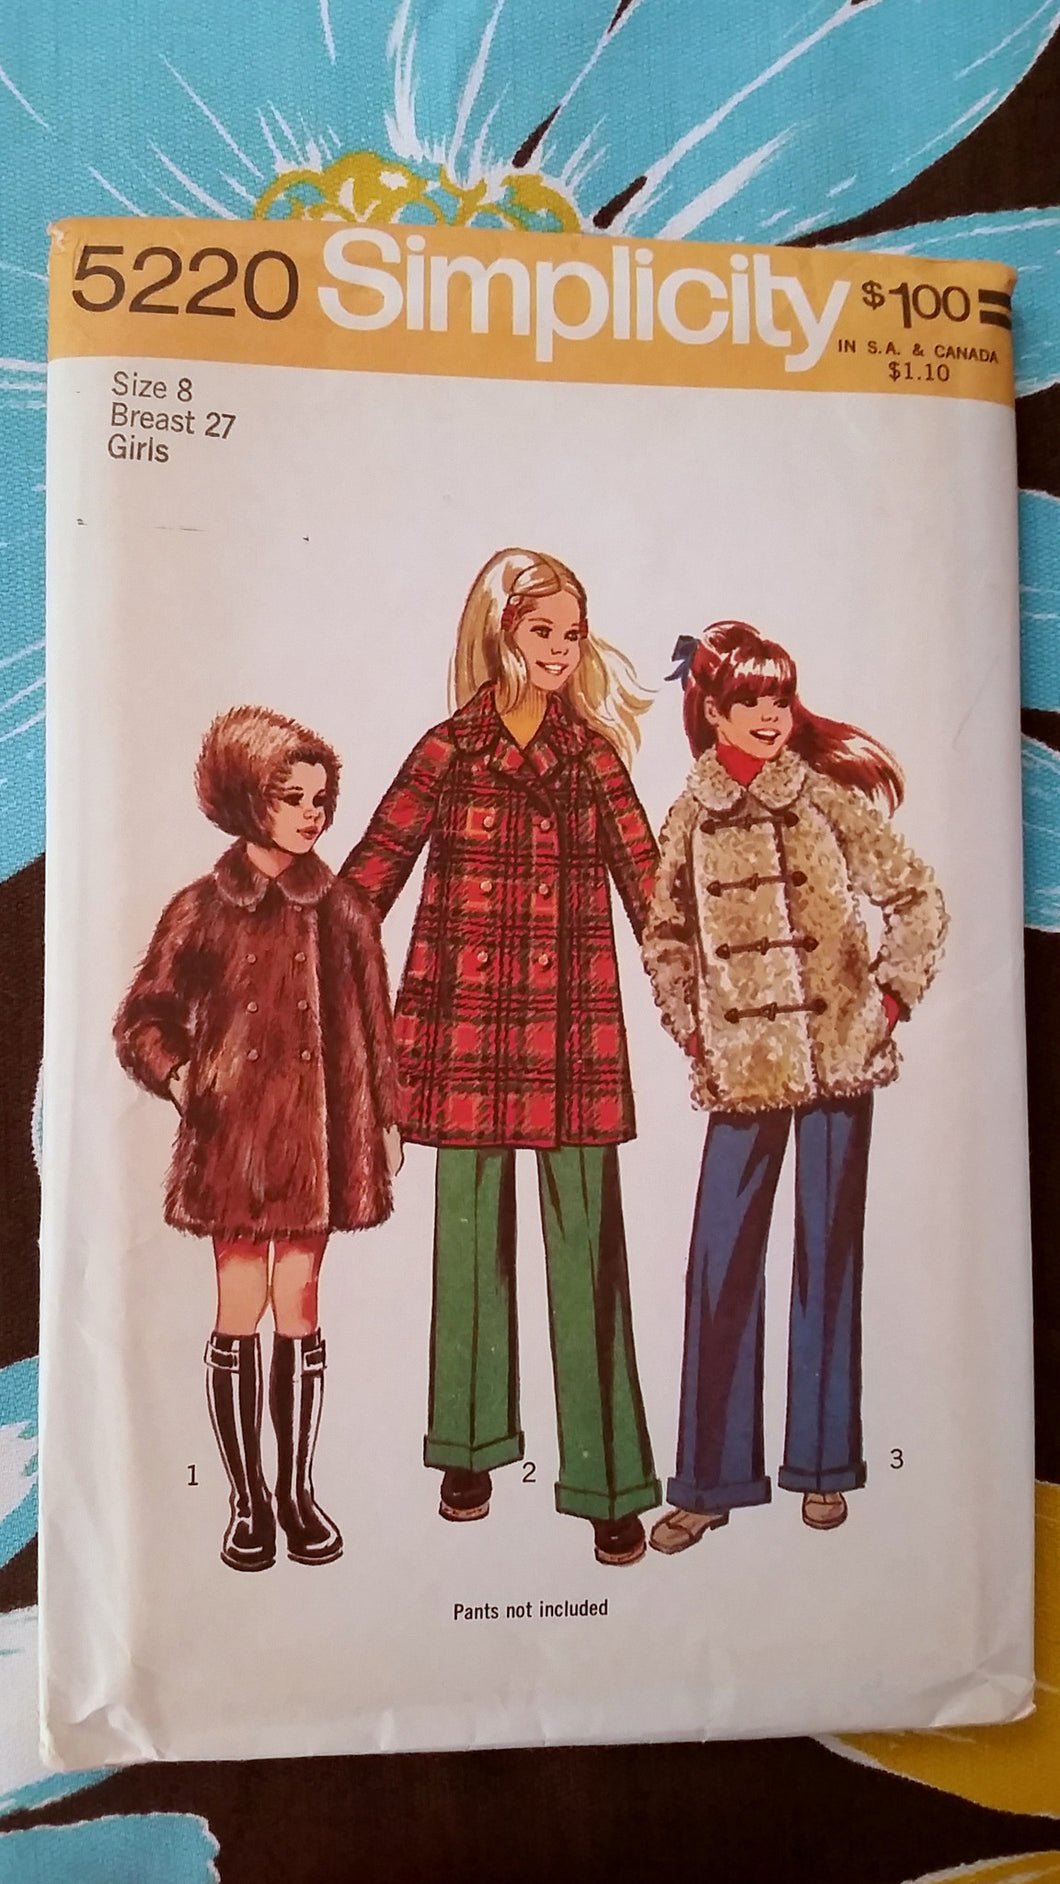 1972 Simplicity Vintage Sewing Pattern 5220 - Girl Coat and Hat - Size 8